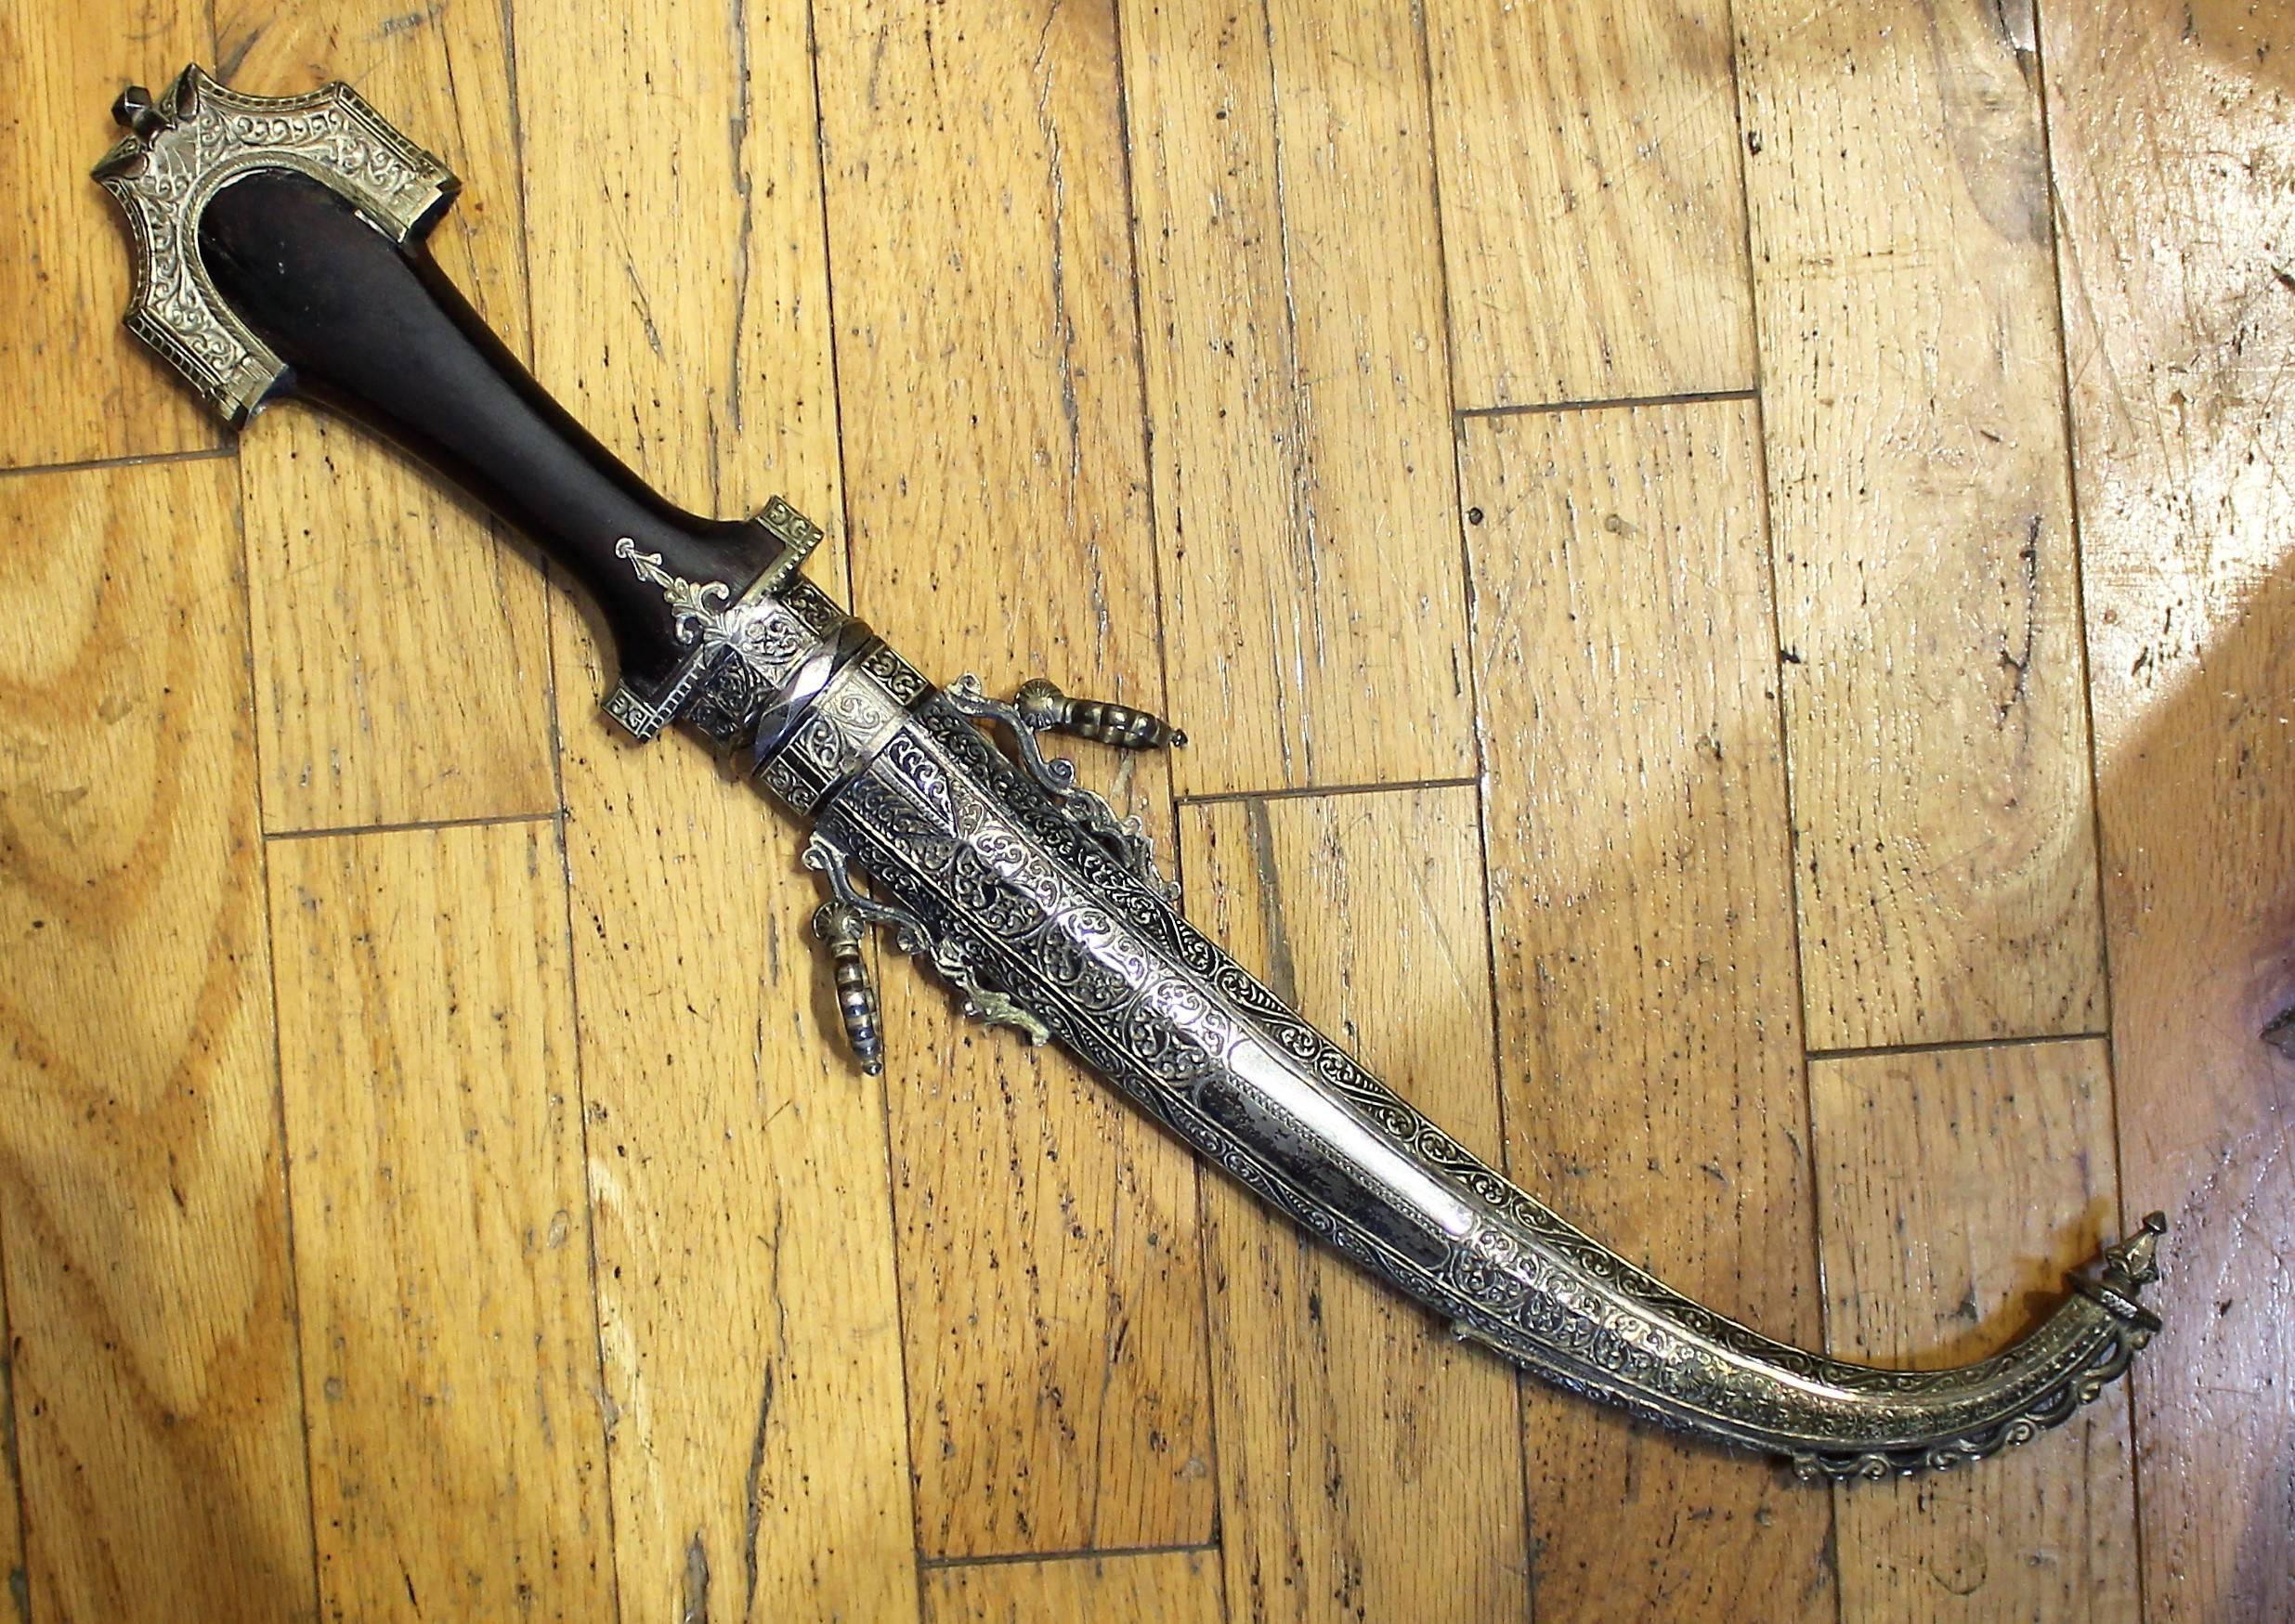 19th century Persian dagger with sheath. Features silver with gold inlay.